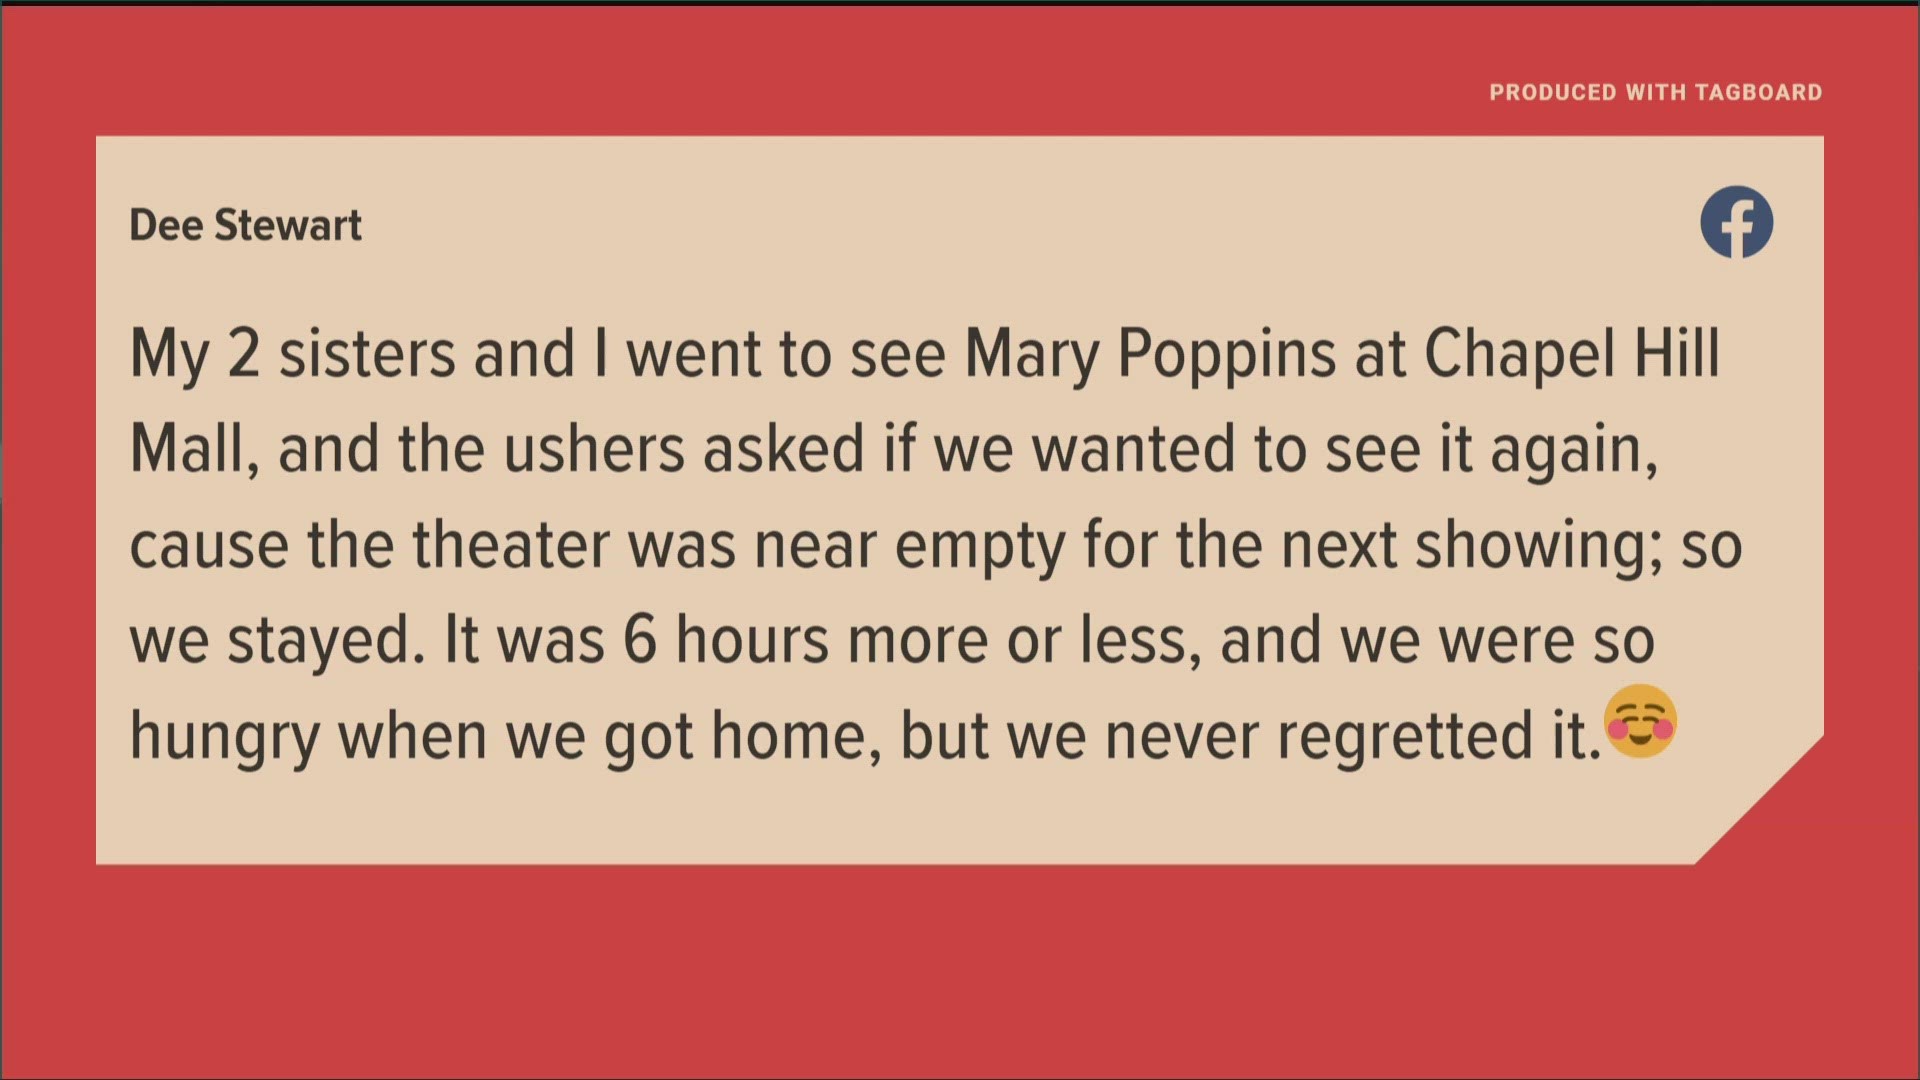 Cinemark is closing its theater in Macedonia. However, B&B Theatres will be investing $6-7 million in the building. No word on when the theater will reopen.